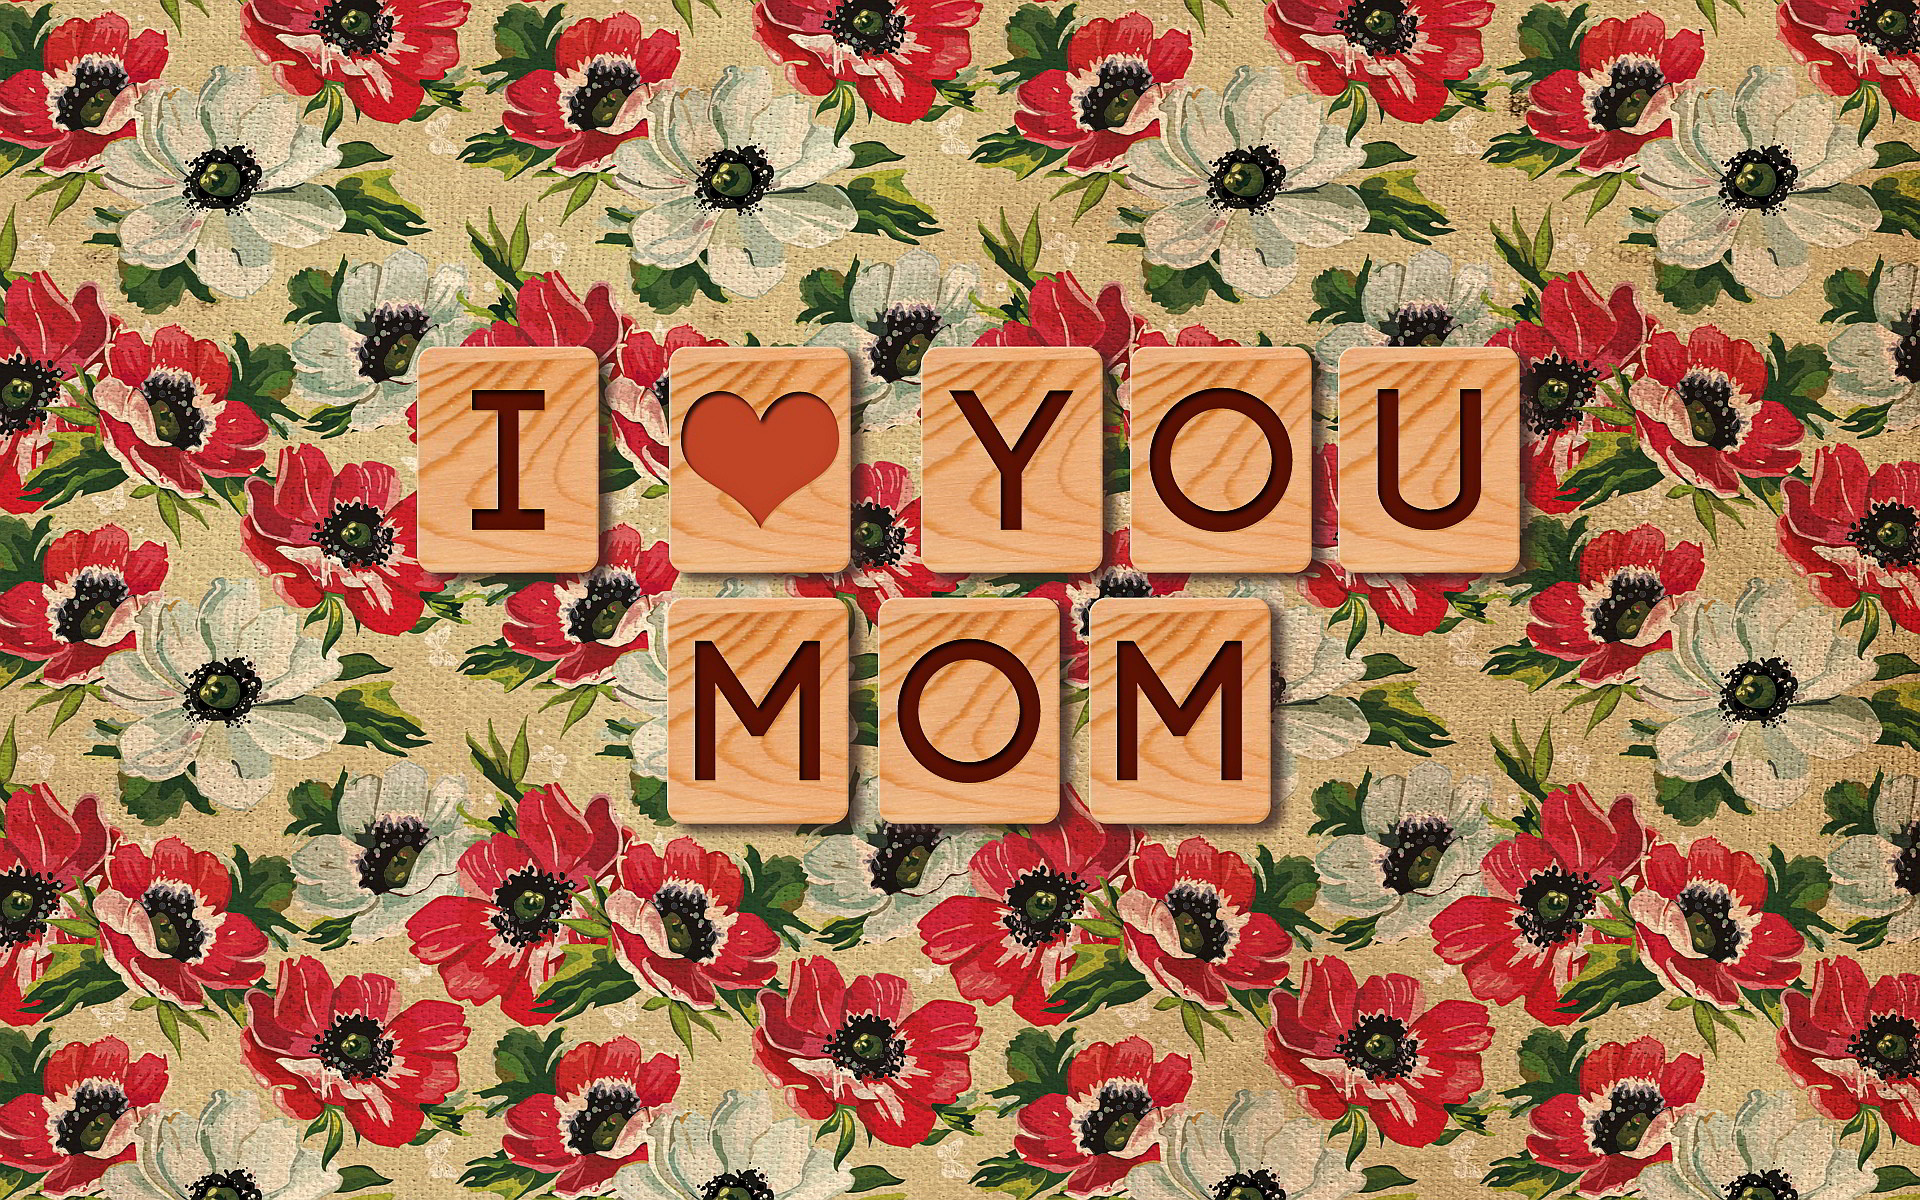 1920x1200 I Love You Mom Wallpapers Images Photos Hd Wallpapers Tumblr Pinterest  Istagram Whatsapp Imo Facebook Twitter - Heart Touching Fashion Summary  Amazon Store